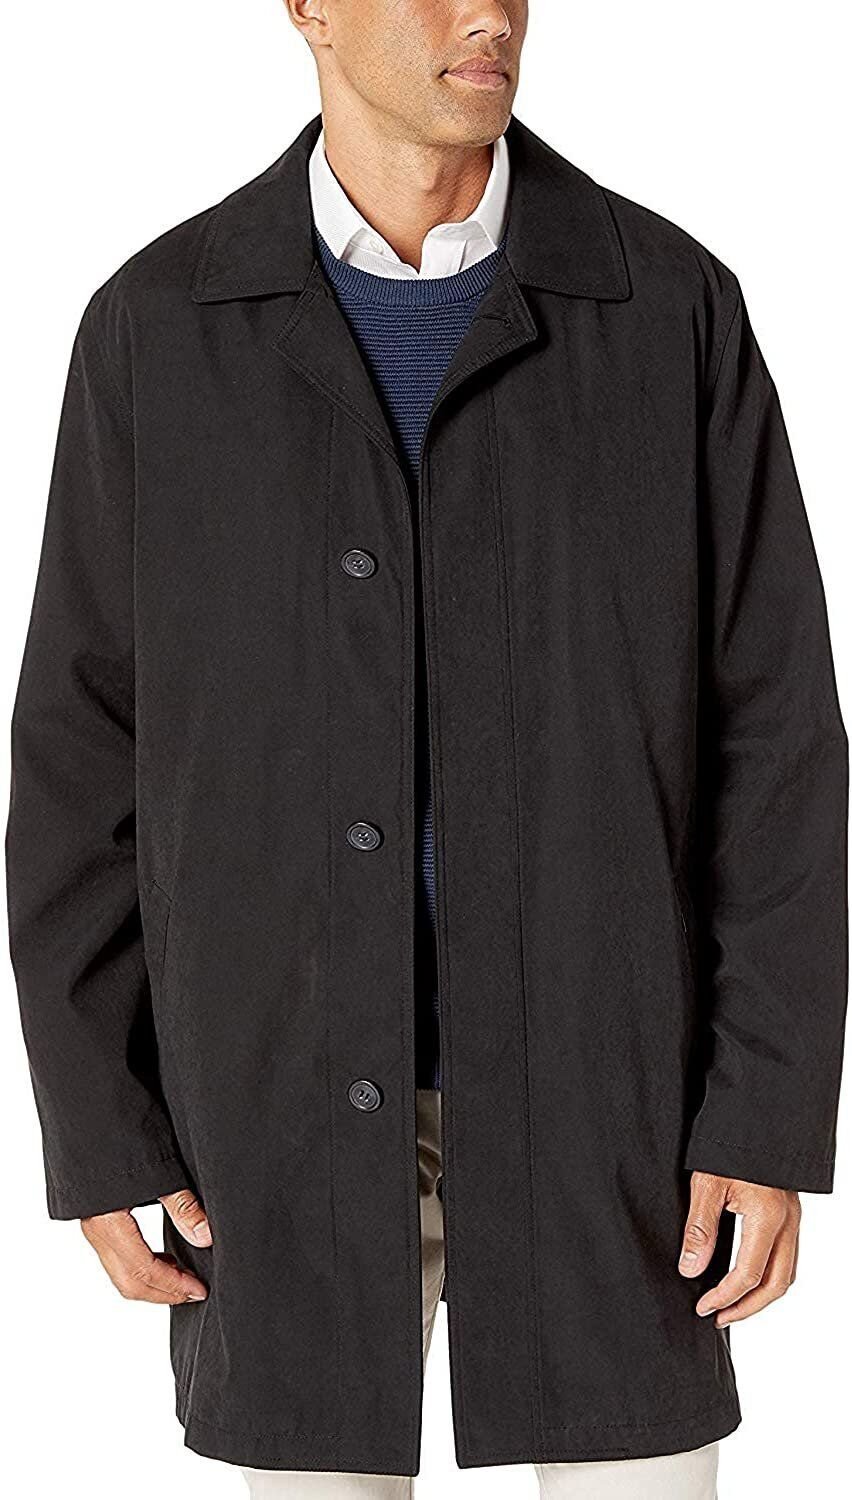 Adam Baker Men's Single Breasted Jacket 3/4 Length All Year Round Raincoat with Removable Liner